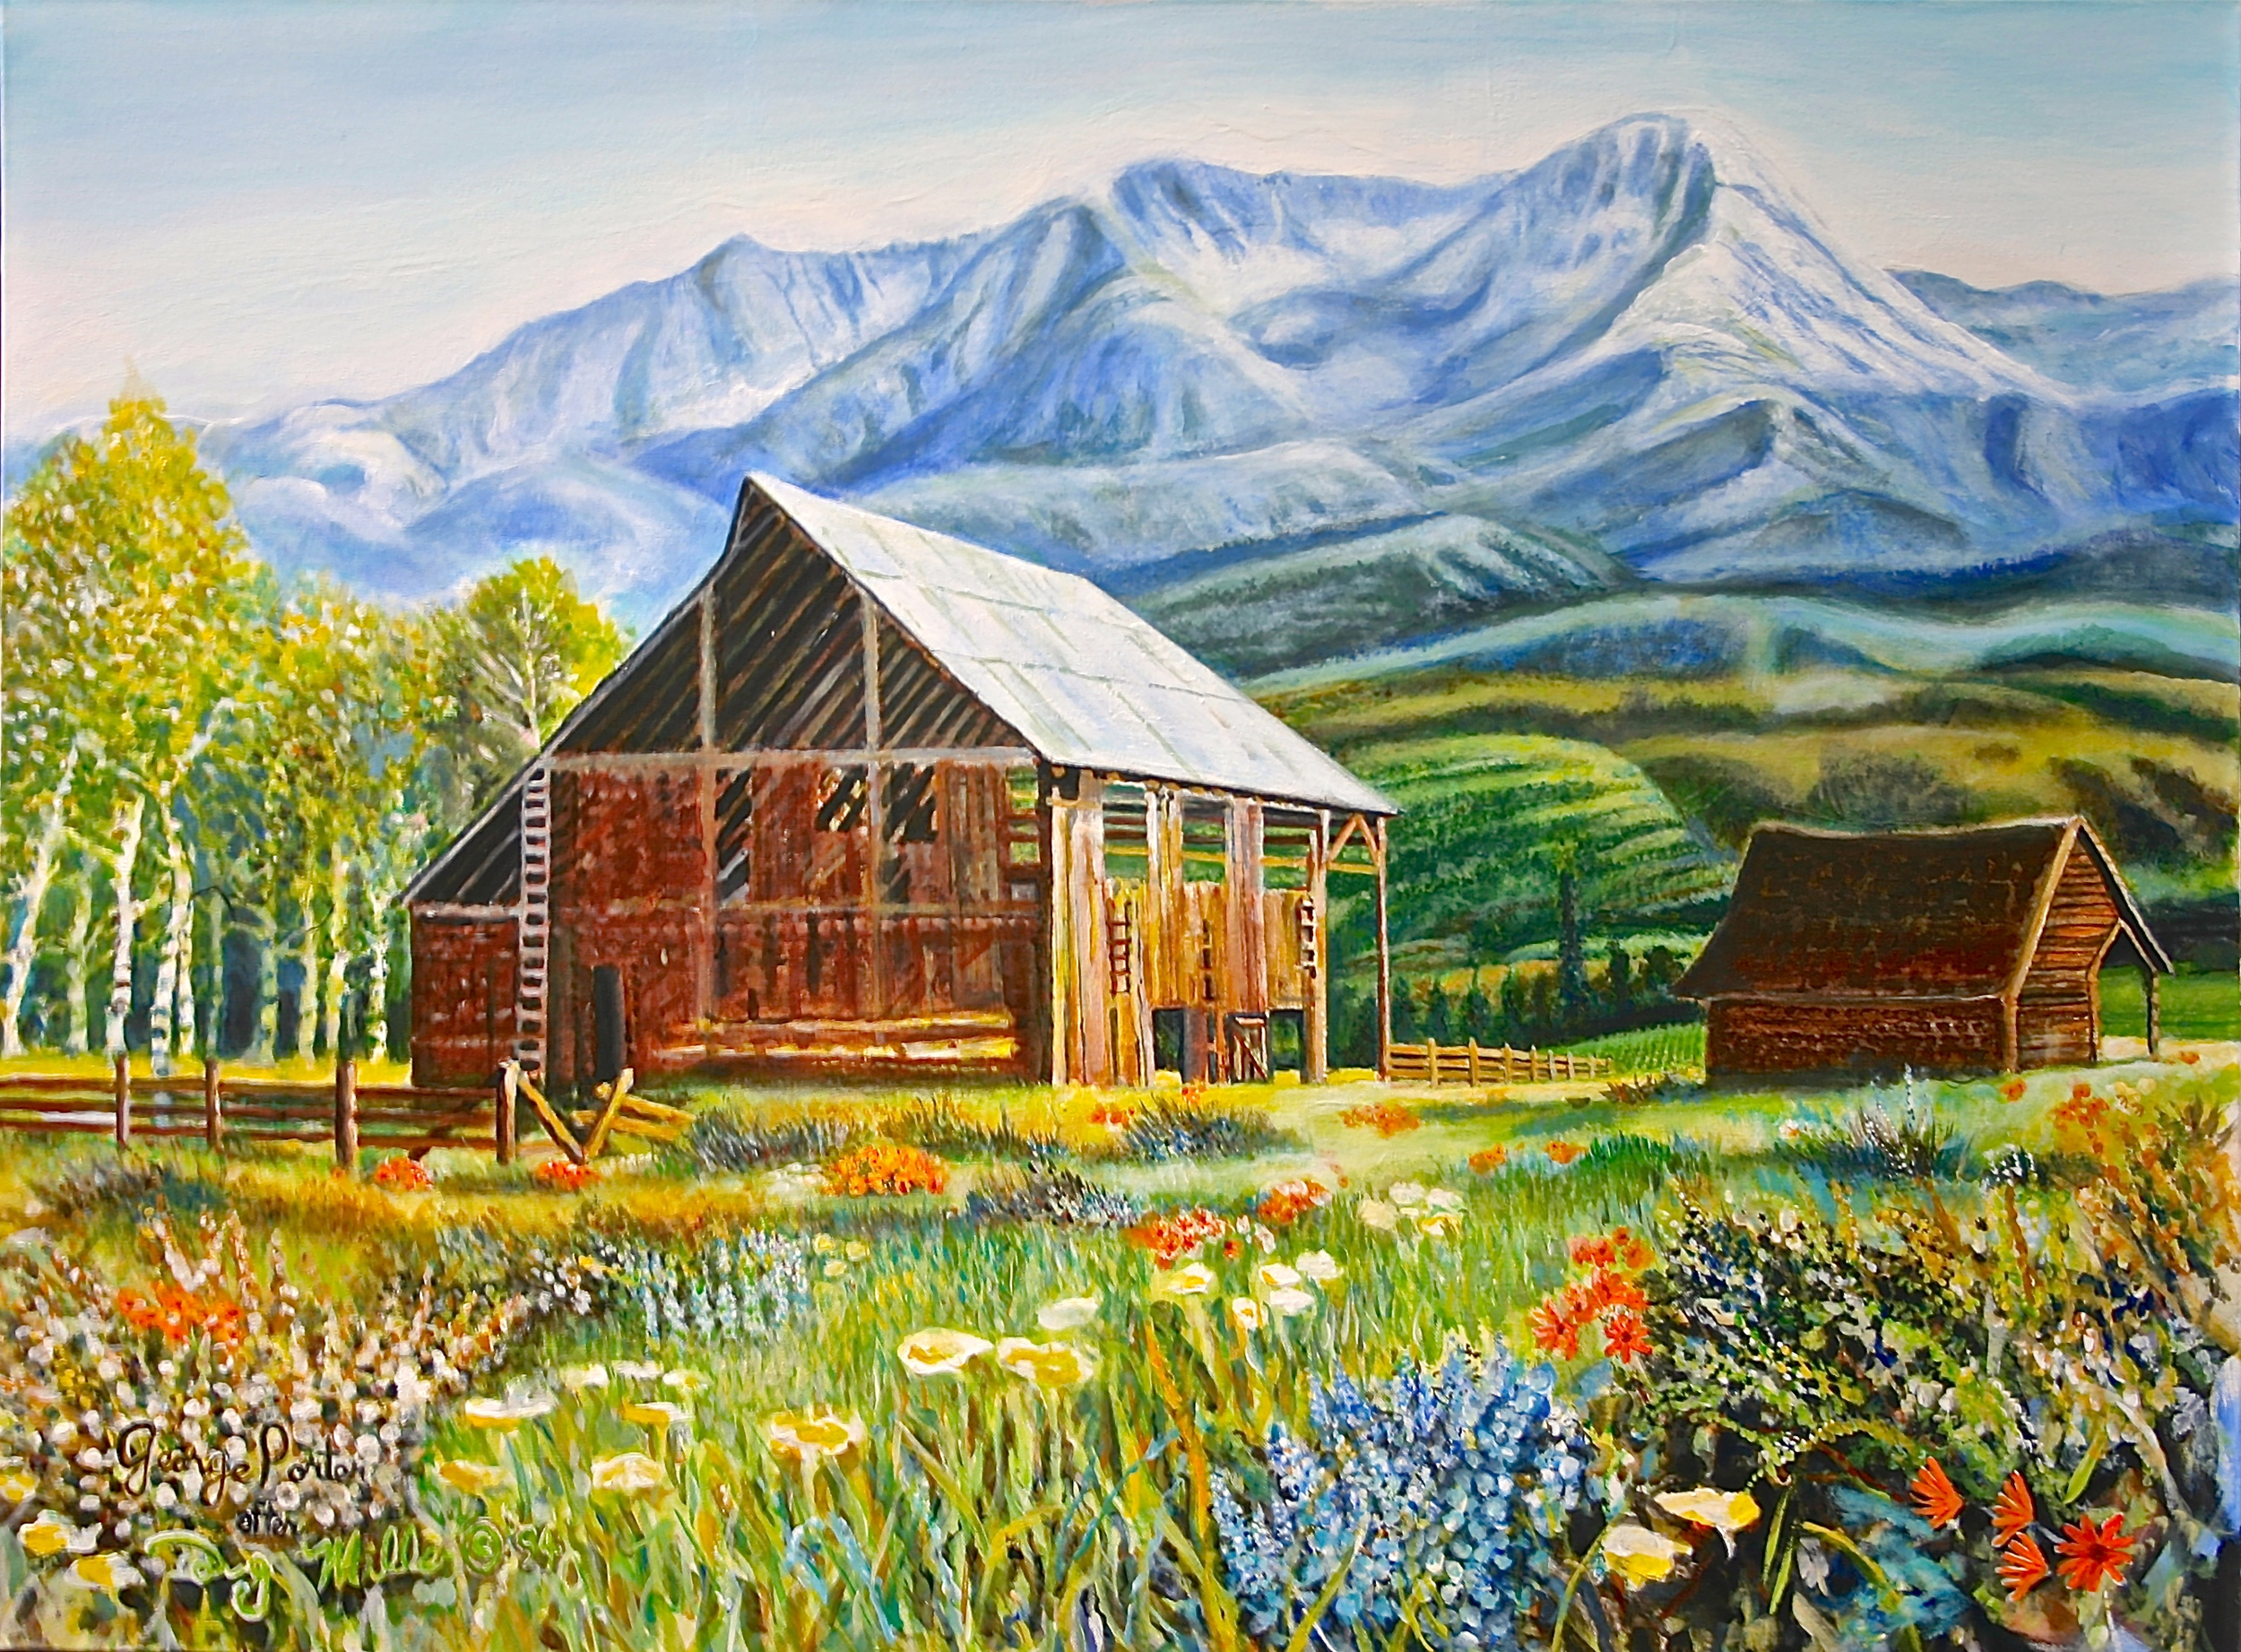 Barn in the Mountains by George Porter after Doug Miller